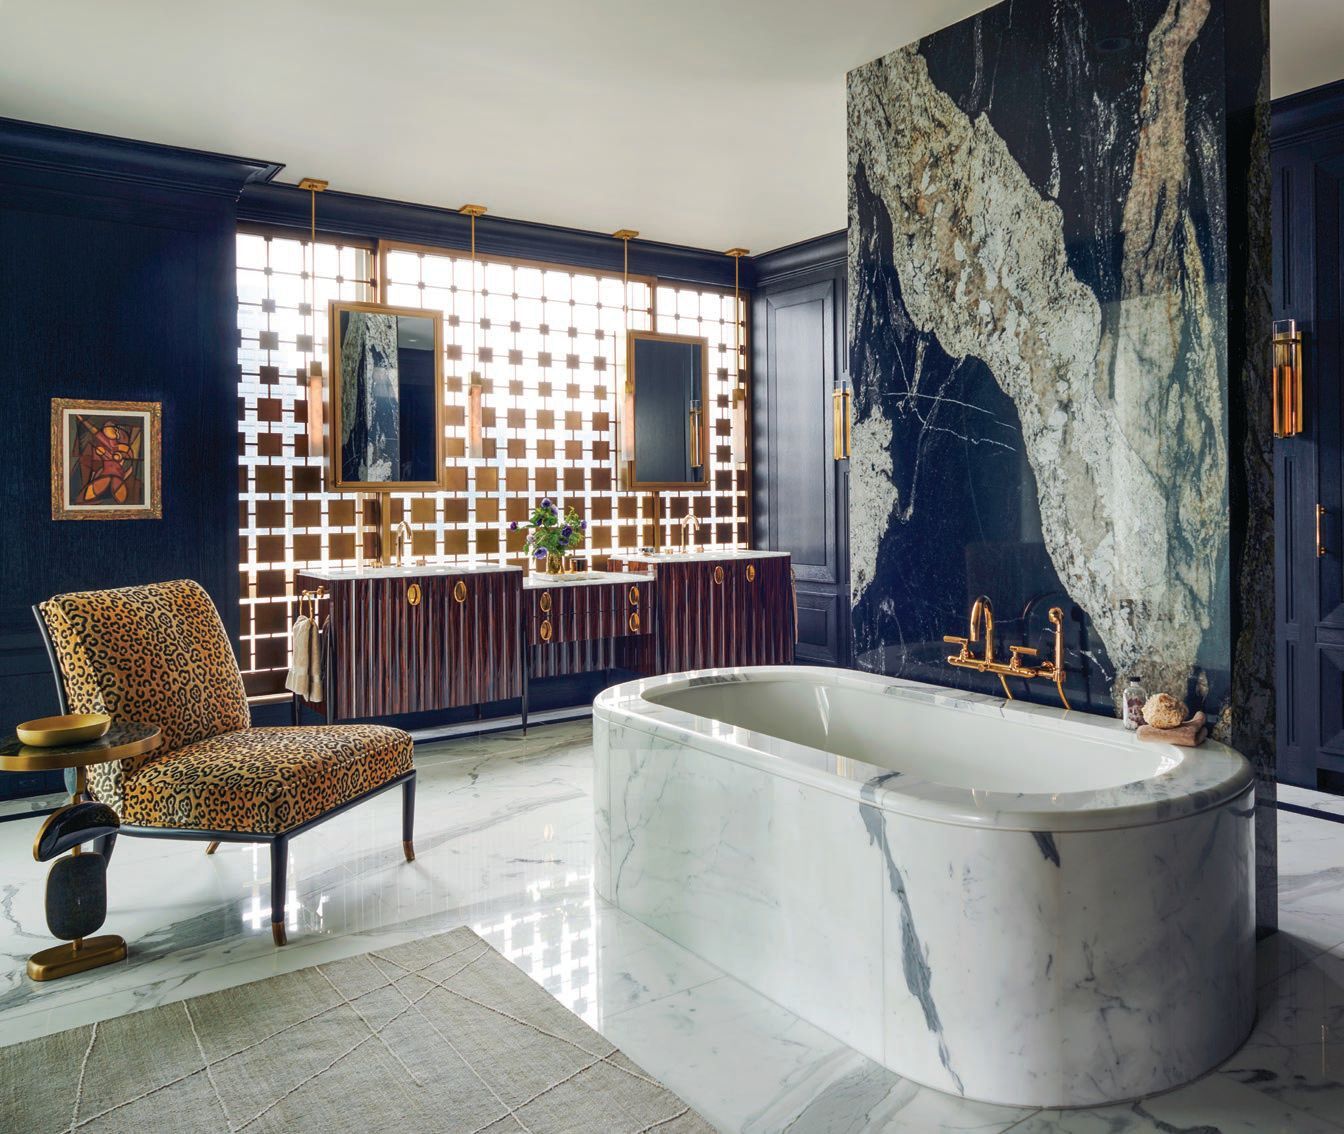 The primary bath is a feast for the eyes, boasting an MTI tub with custom marble shroud and slab wall fabricated by SIMI Stone, leopard print Brou chair by Alfonso Marina and custom vanity designed by Soucie Horner Interiors Photographed by Richard Powers